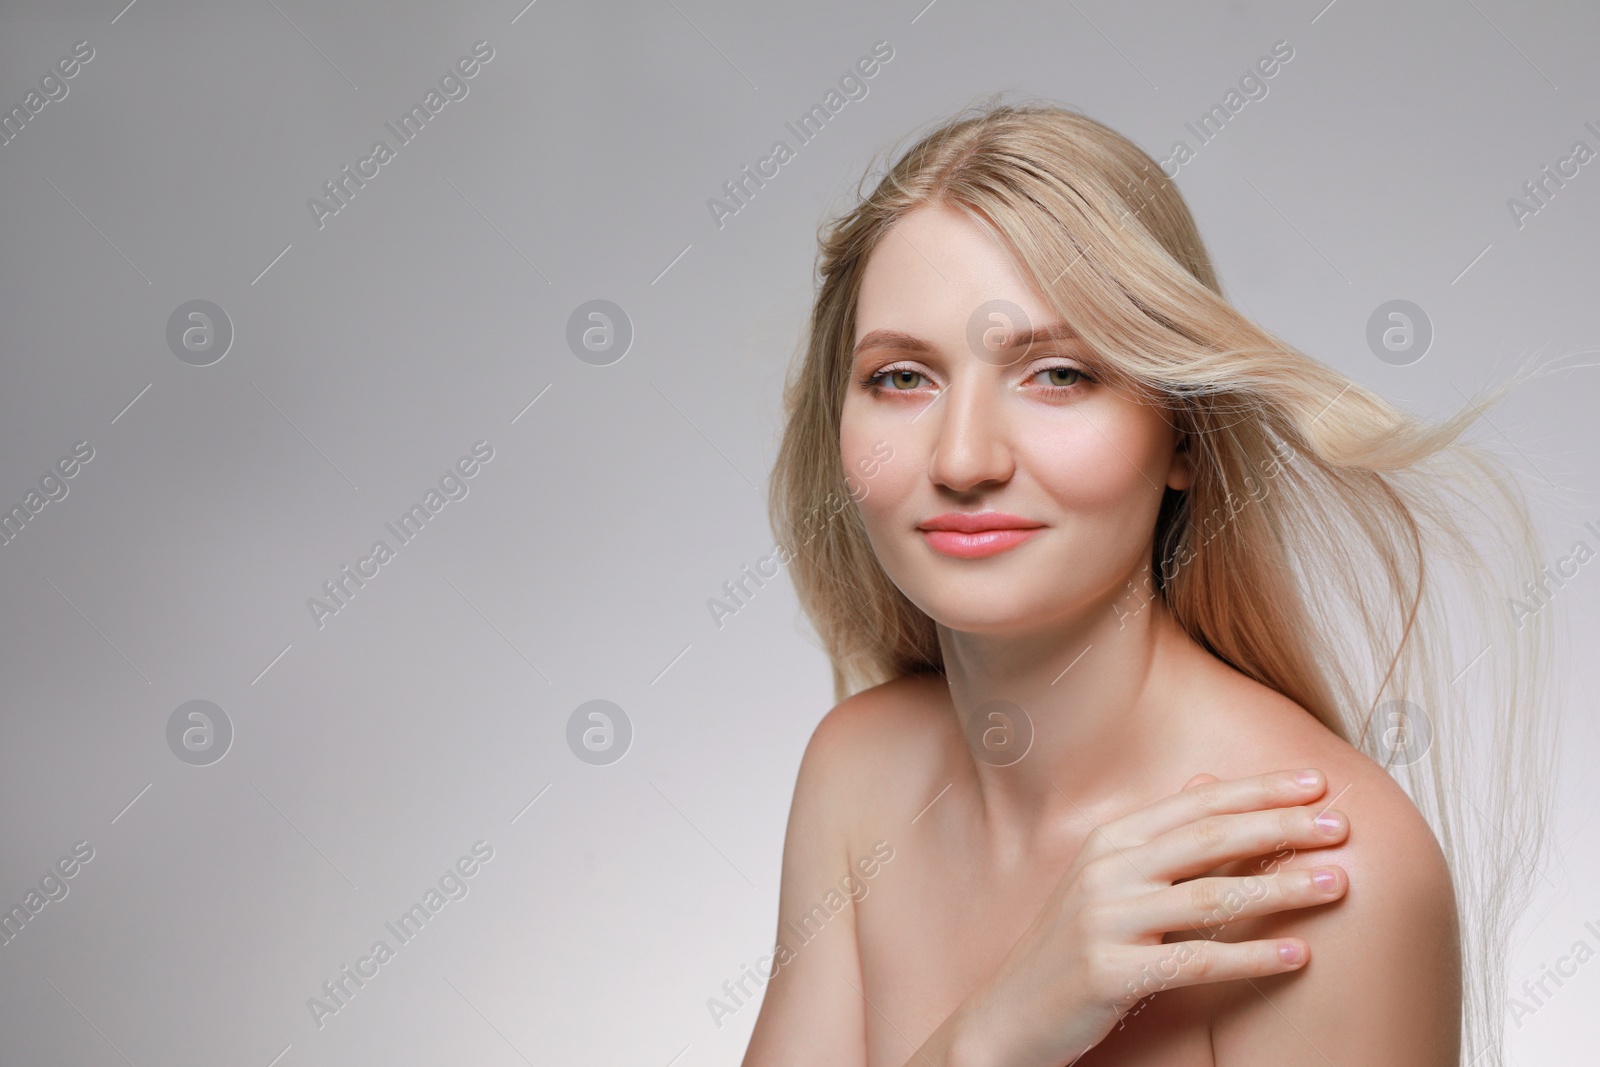 Photo of Portrait of young woman with beautiful face on beige background. Space for text